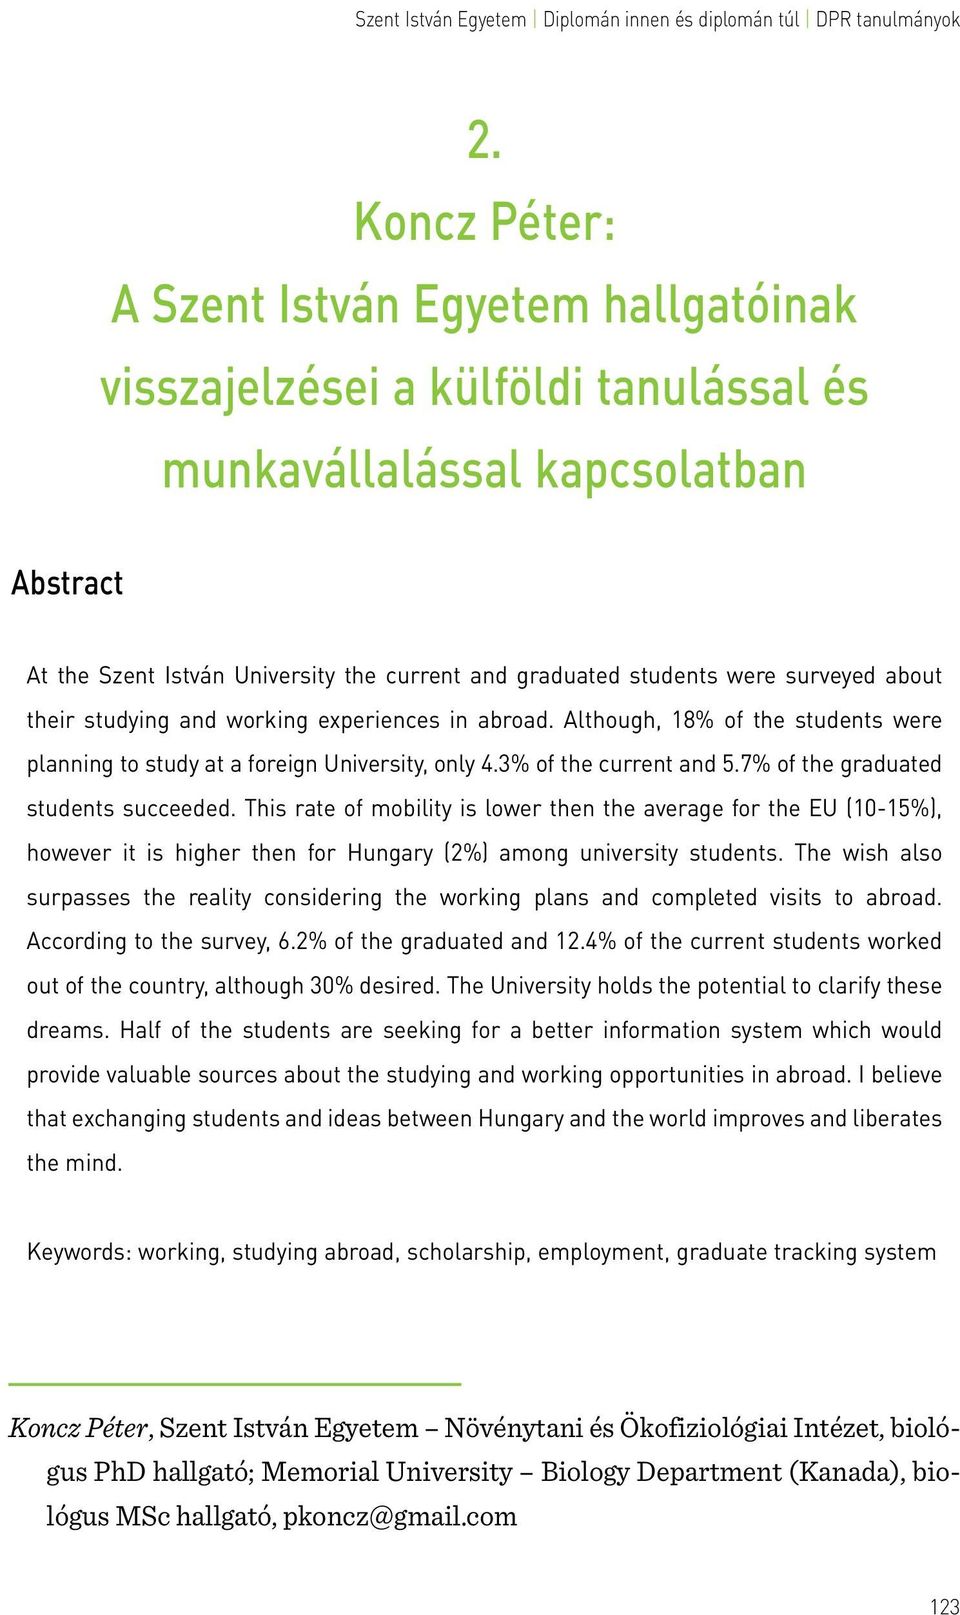 7% of the graduated students succeeded. This rate of mobility is lower then the average for the EU (10-15%), however it is higher then for Hungary (2%) among university students.